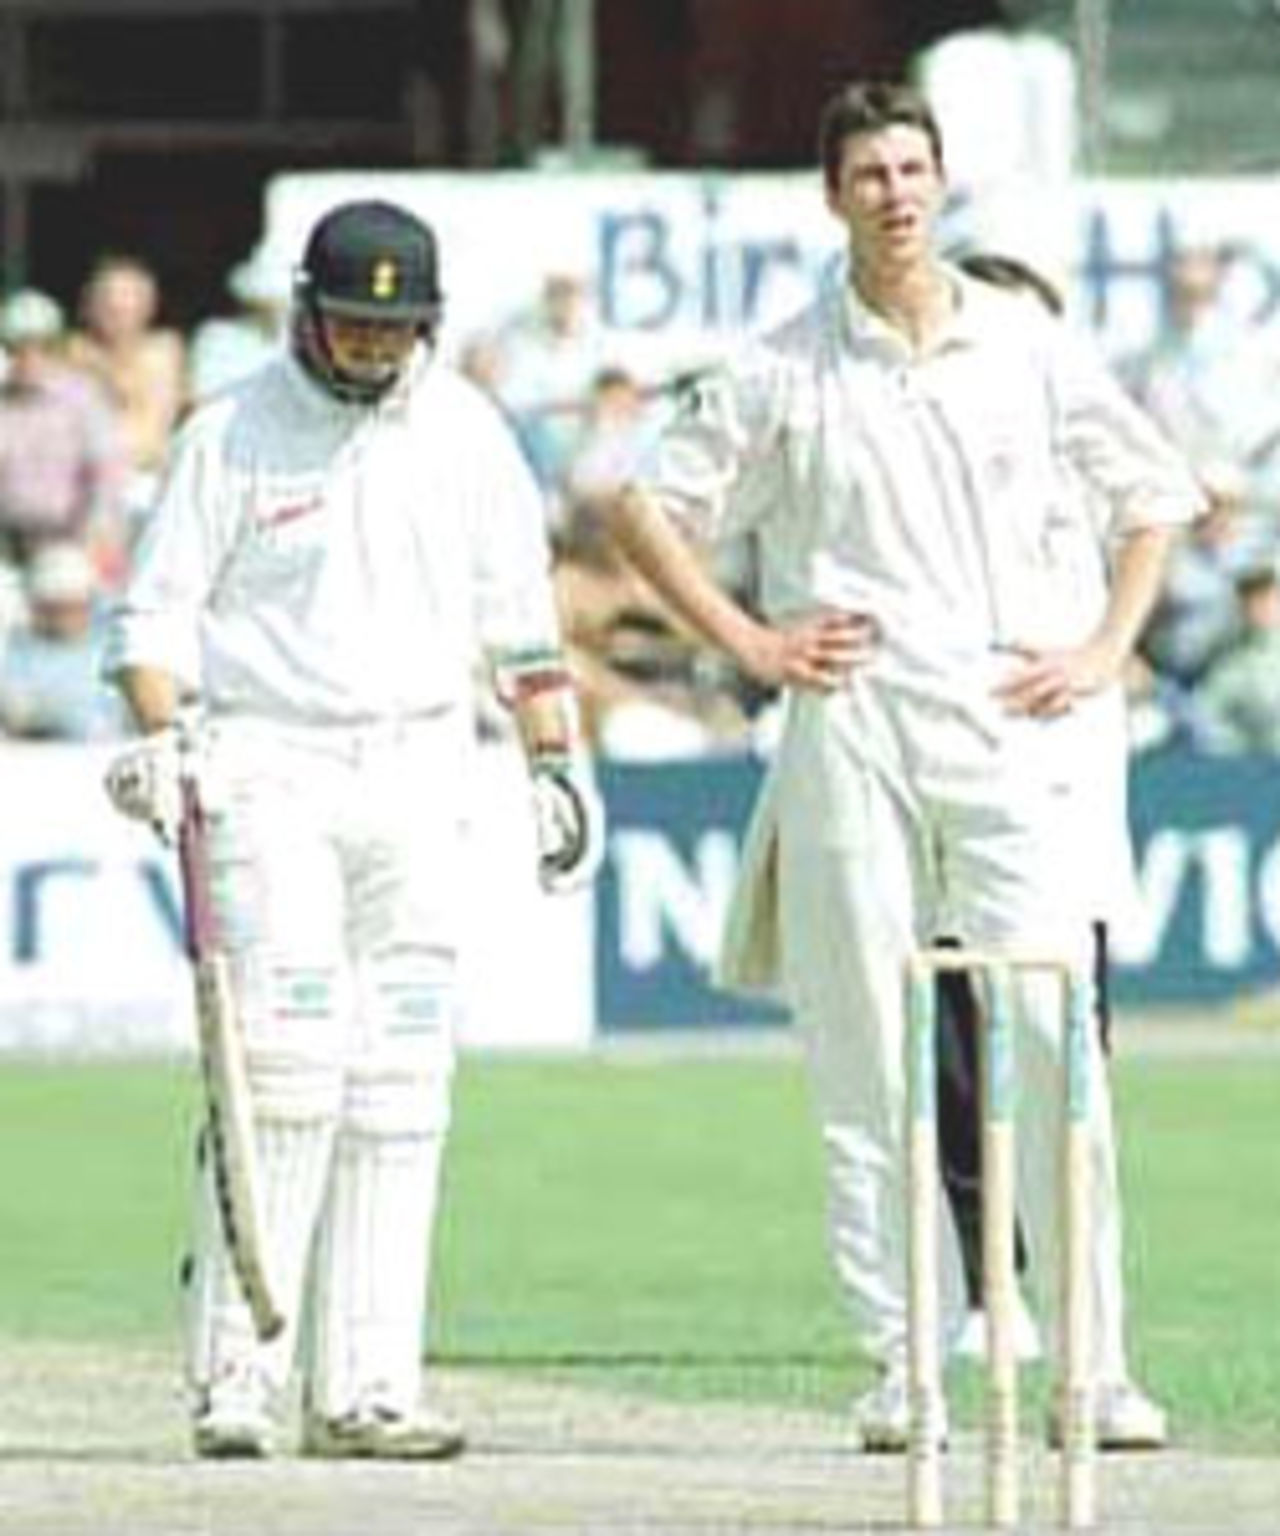 Mike Smethurst watches another edge go for 4, PPP healthcare County Championship Division One, 2000, Derbyshire v Lancashire, County Ground, Derby, 07-10 July 2000 (Day 1).